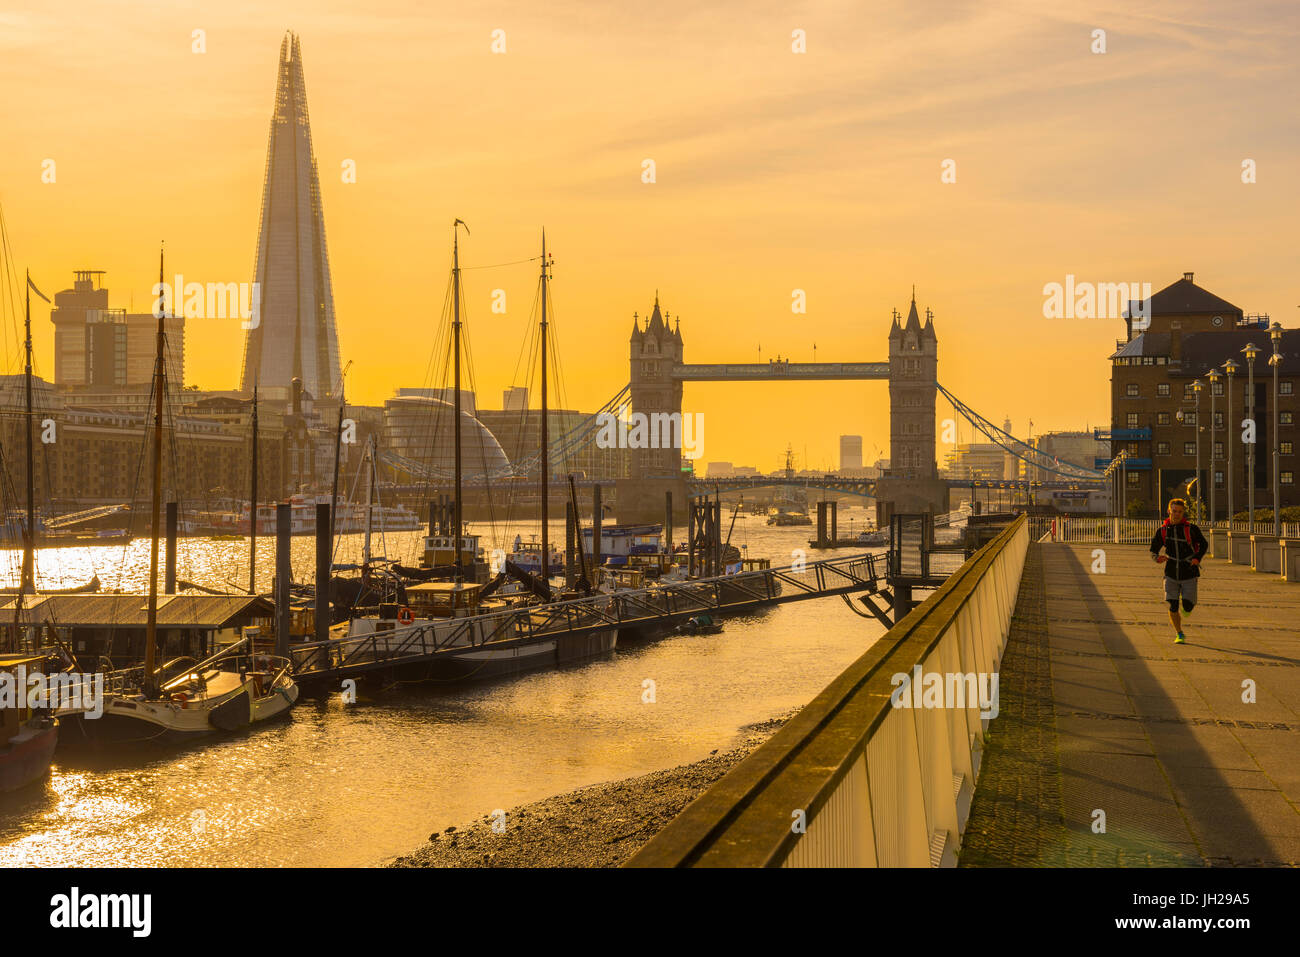 The Shard and Tower Bridge over River Thames, London, England, United Kingdom, Europe Stock Photo